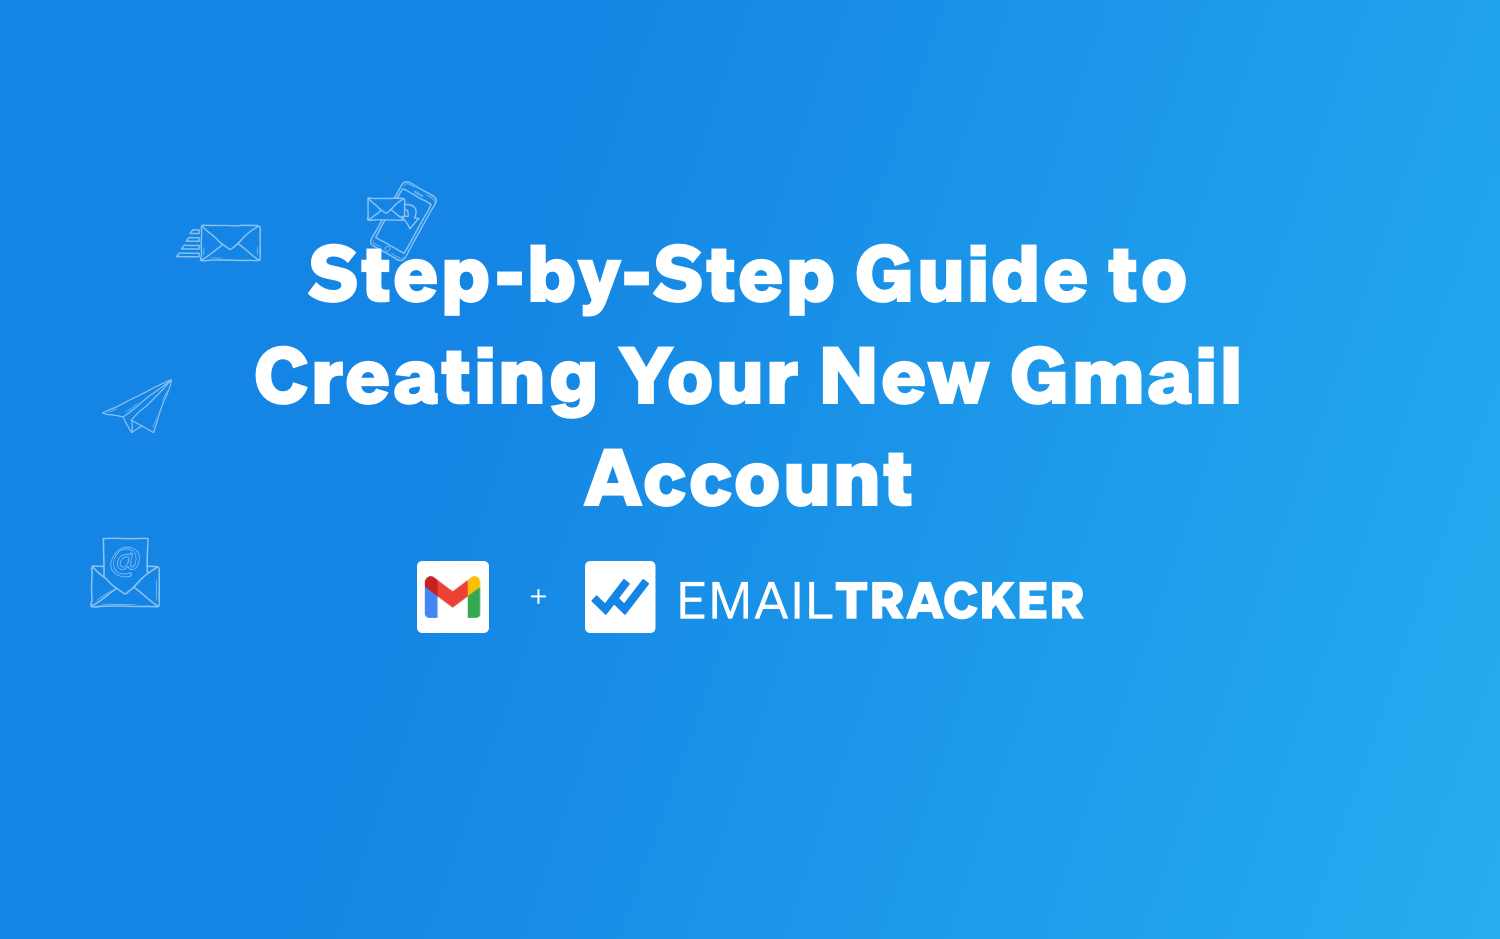 Step-by-Step Guide to Creating Your New Gmail Account